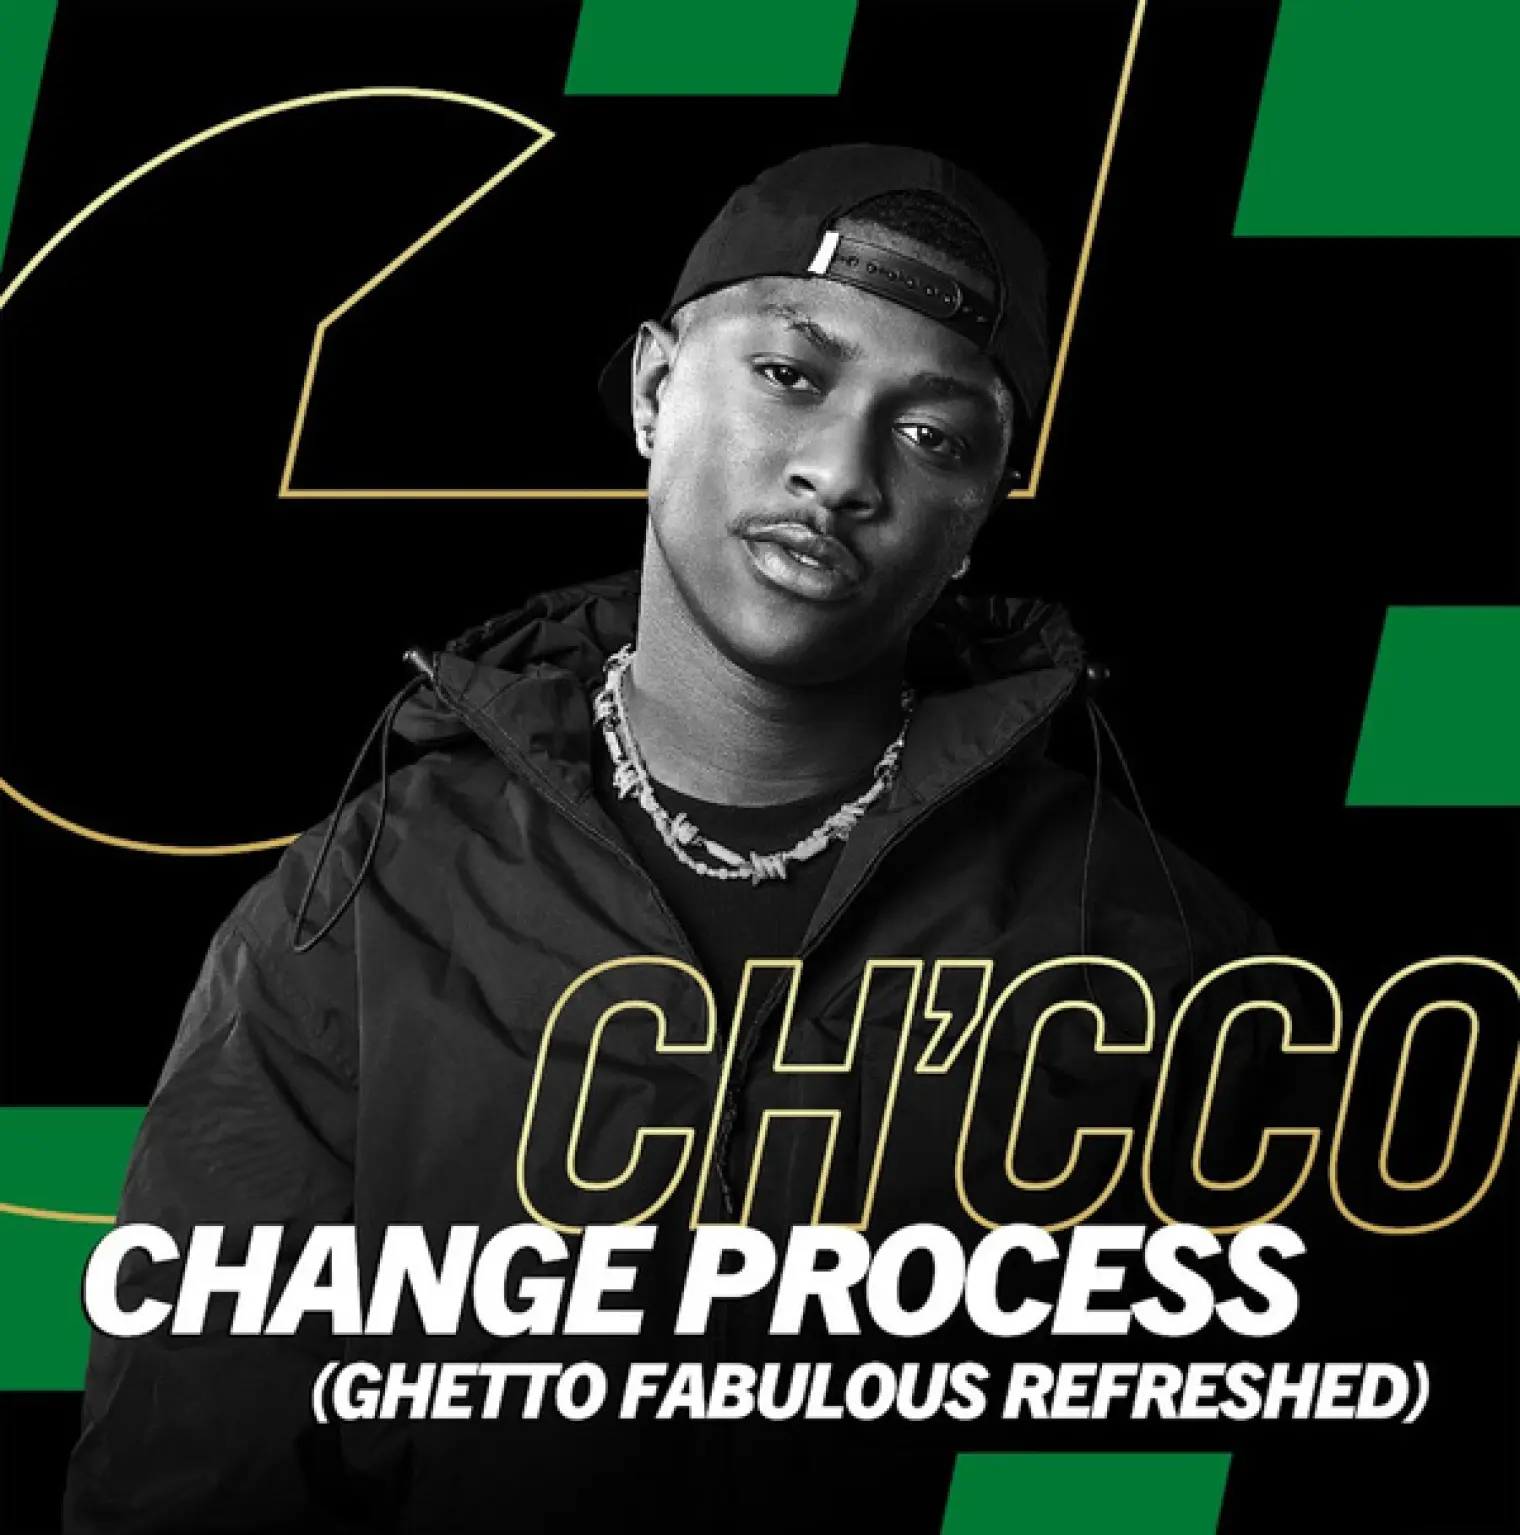 Change Process (Ghetto Fabulous Refreshed) -  Ch'cco 